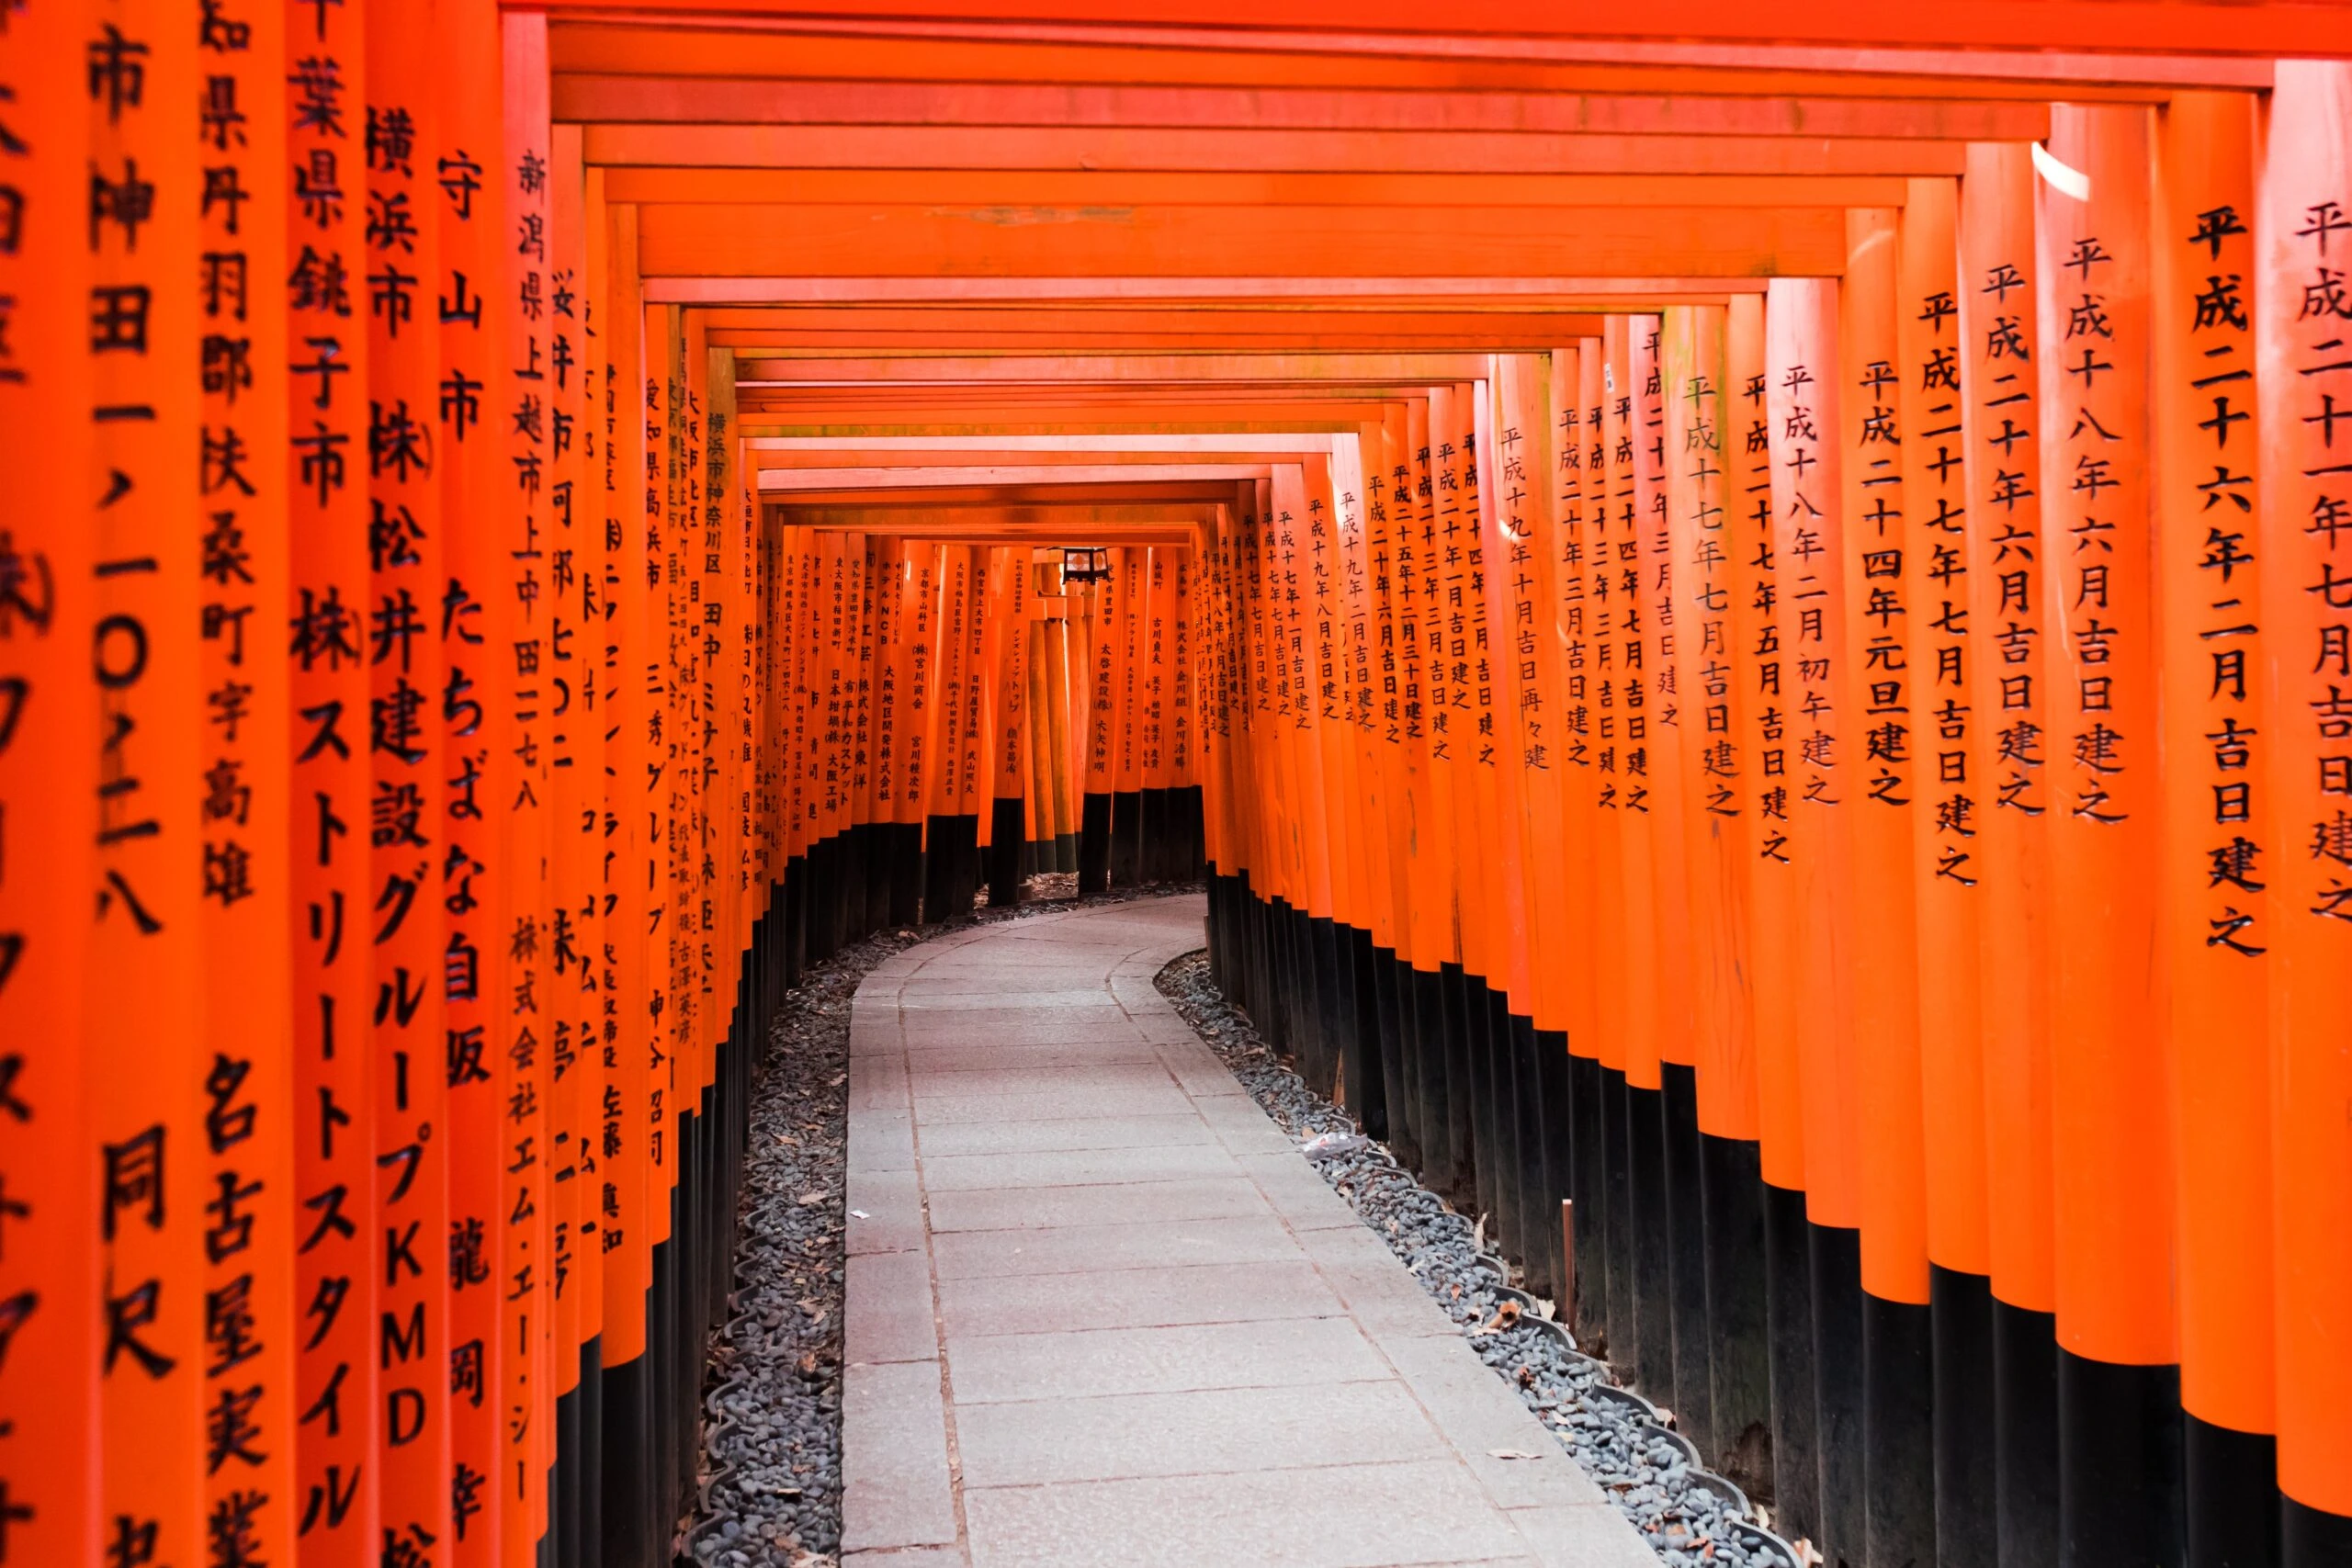 billy-pasco-Orange scroll walls with Japanese calligraphy forming walls with concrete paved path between-unsplash